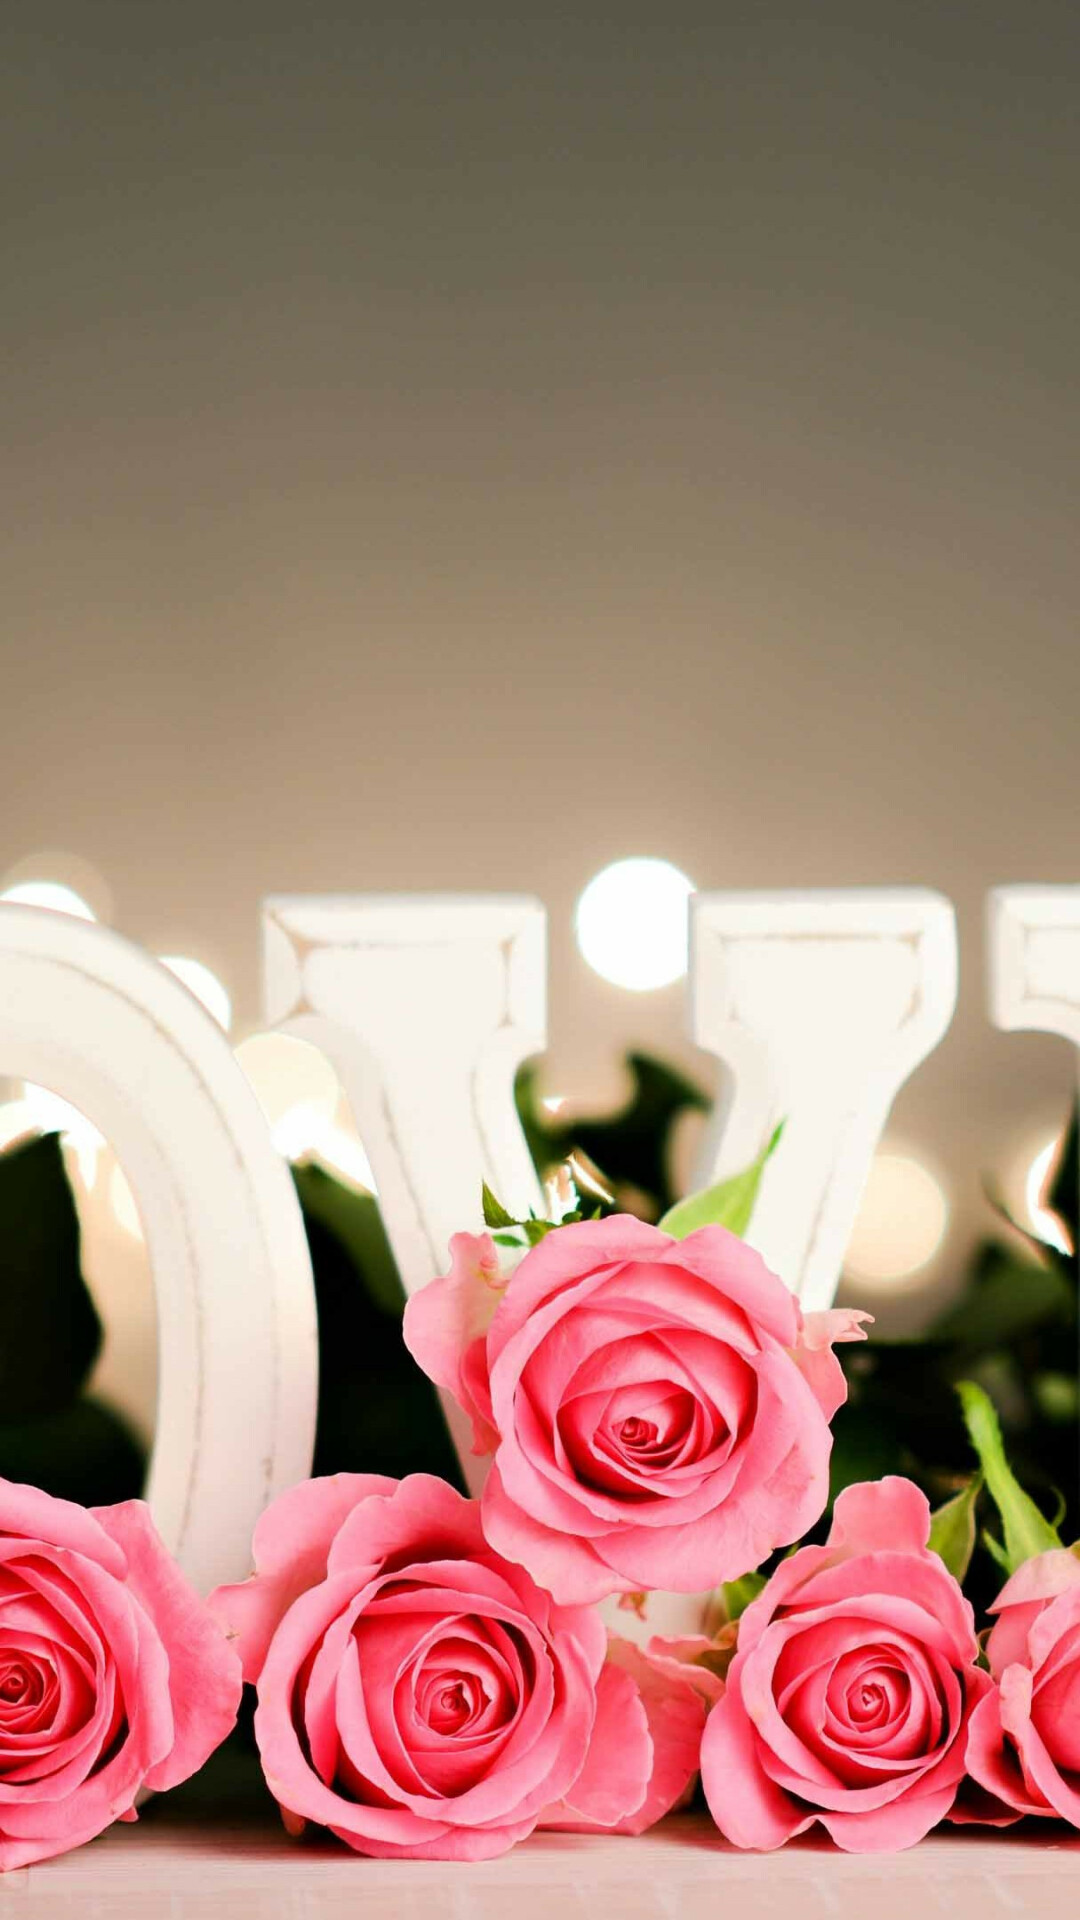 Rose: The flowers of wild roses usually have five petals, whereas the flowers of cultivated roses are often double. 1080x1920 Full HD Background.